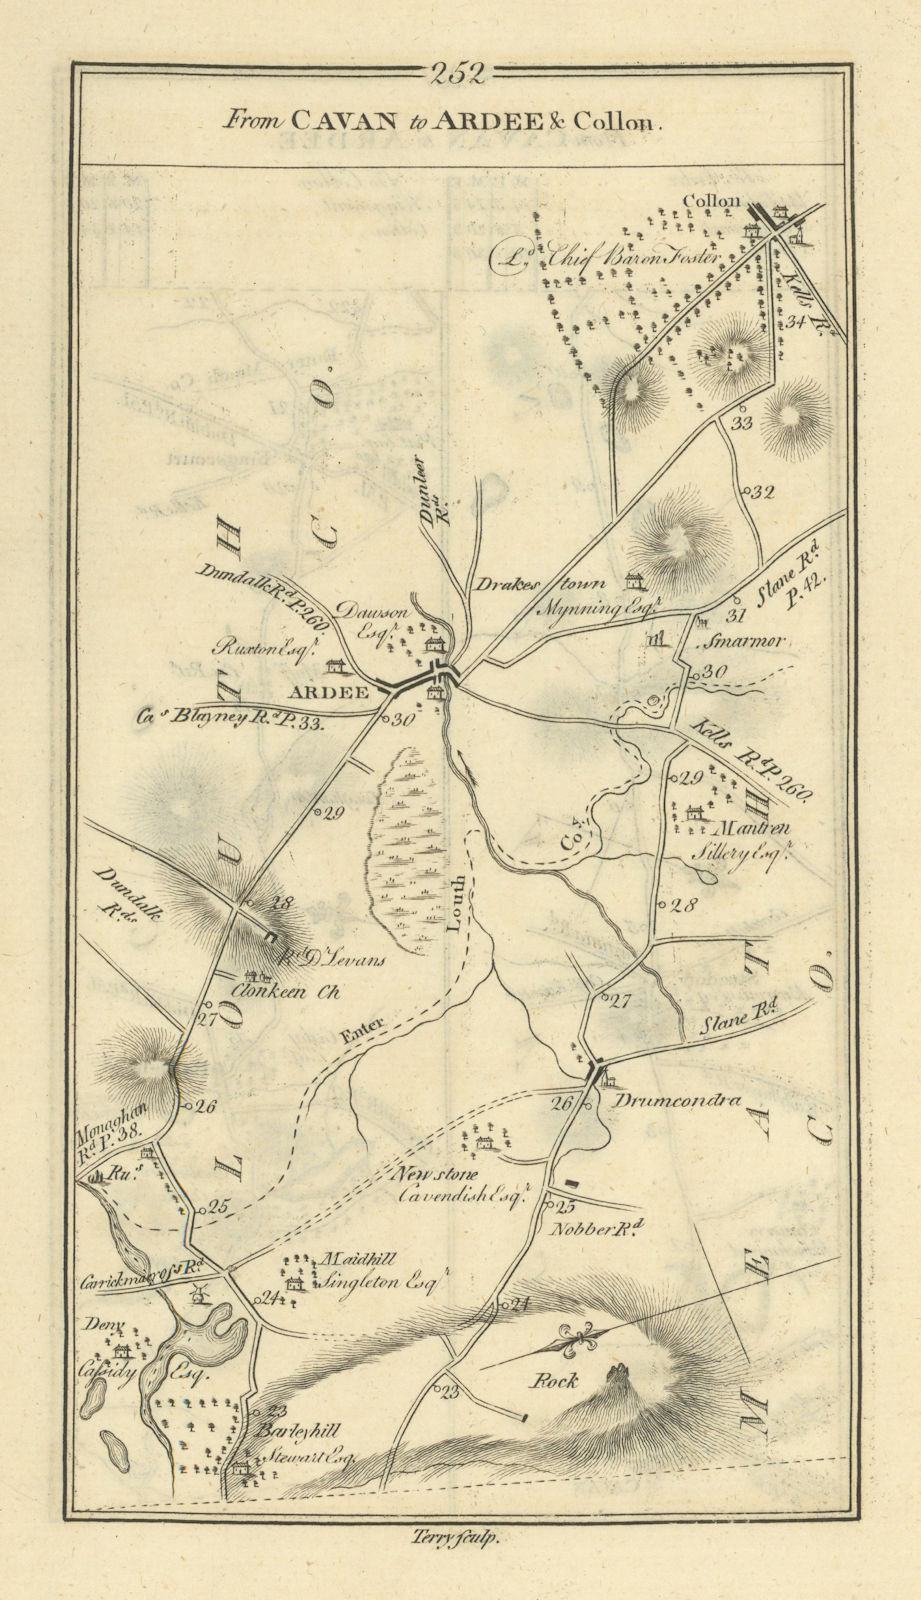 Associate Product #252 From Cavan to Ardee & Collon. Louth. TAYLOR/SKINNER 1778 old antique map